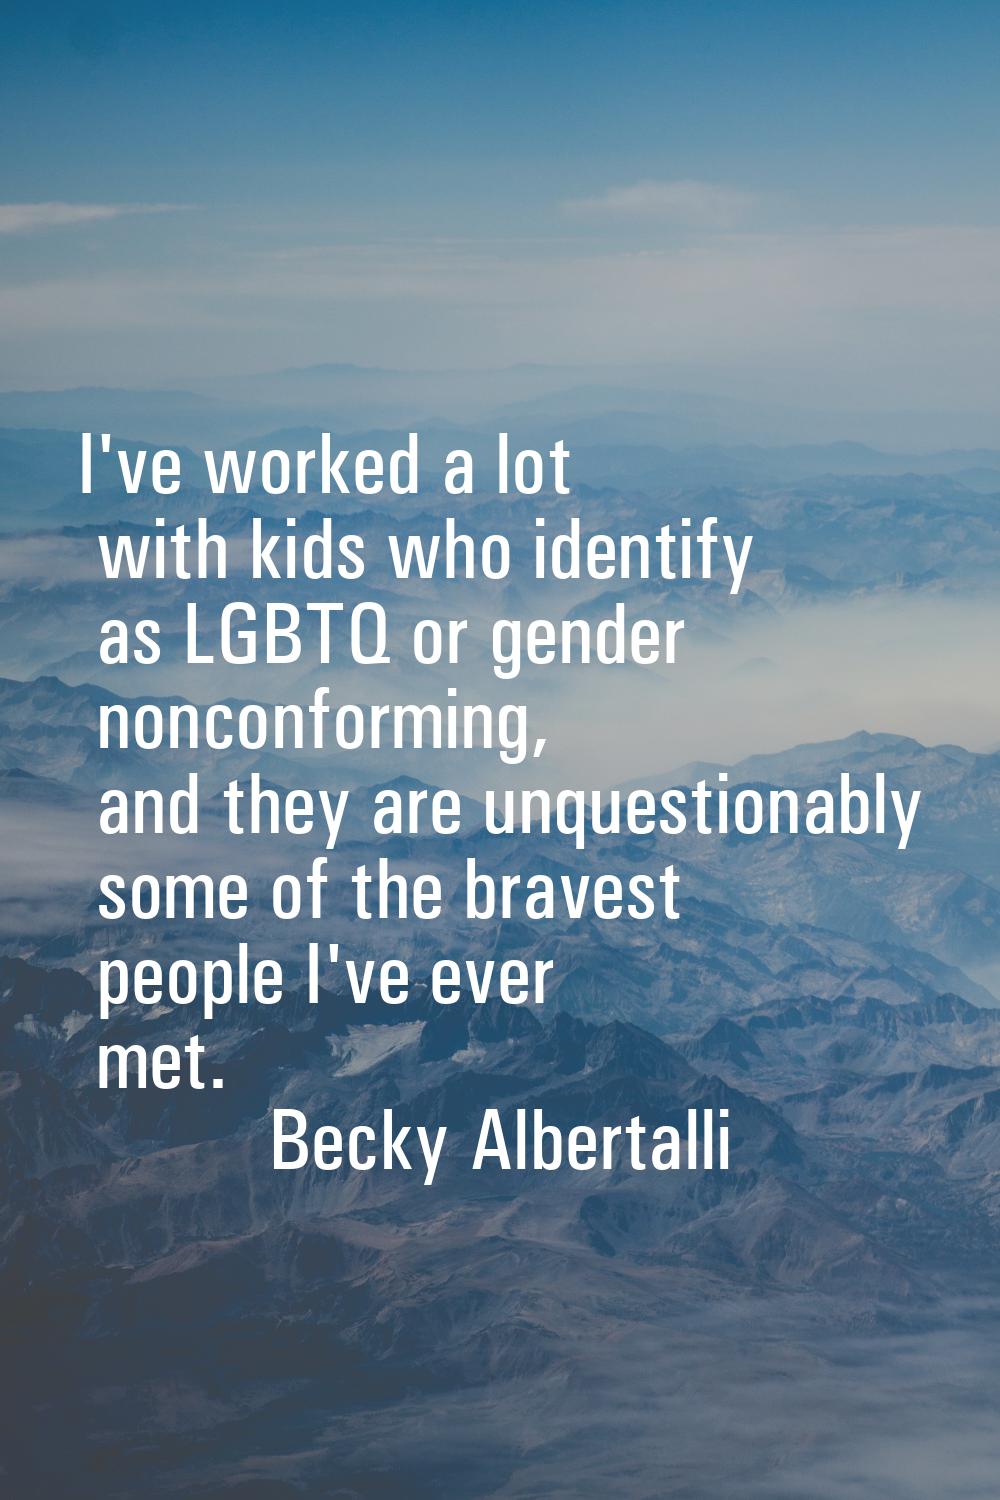 I've worked a lot with kids who identify as LGBTQ or gender nonconforming, and they are unquestiona